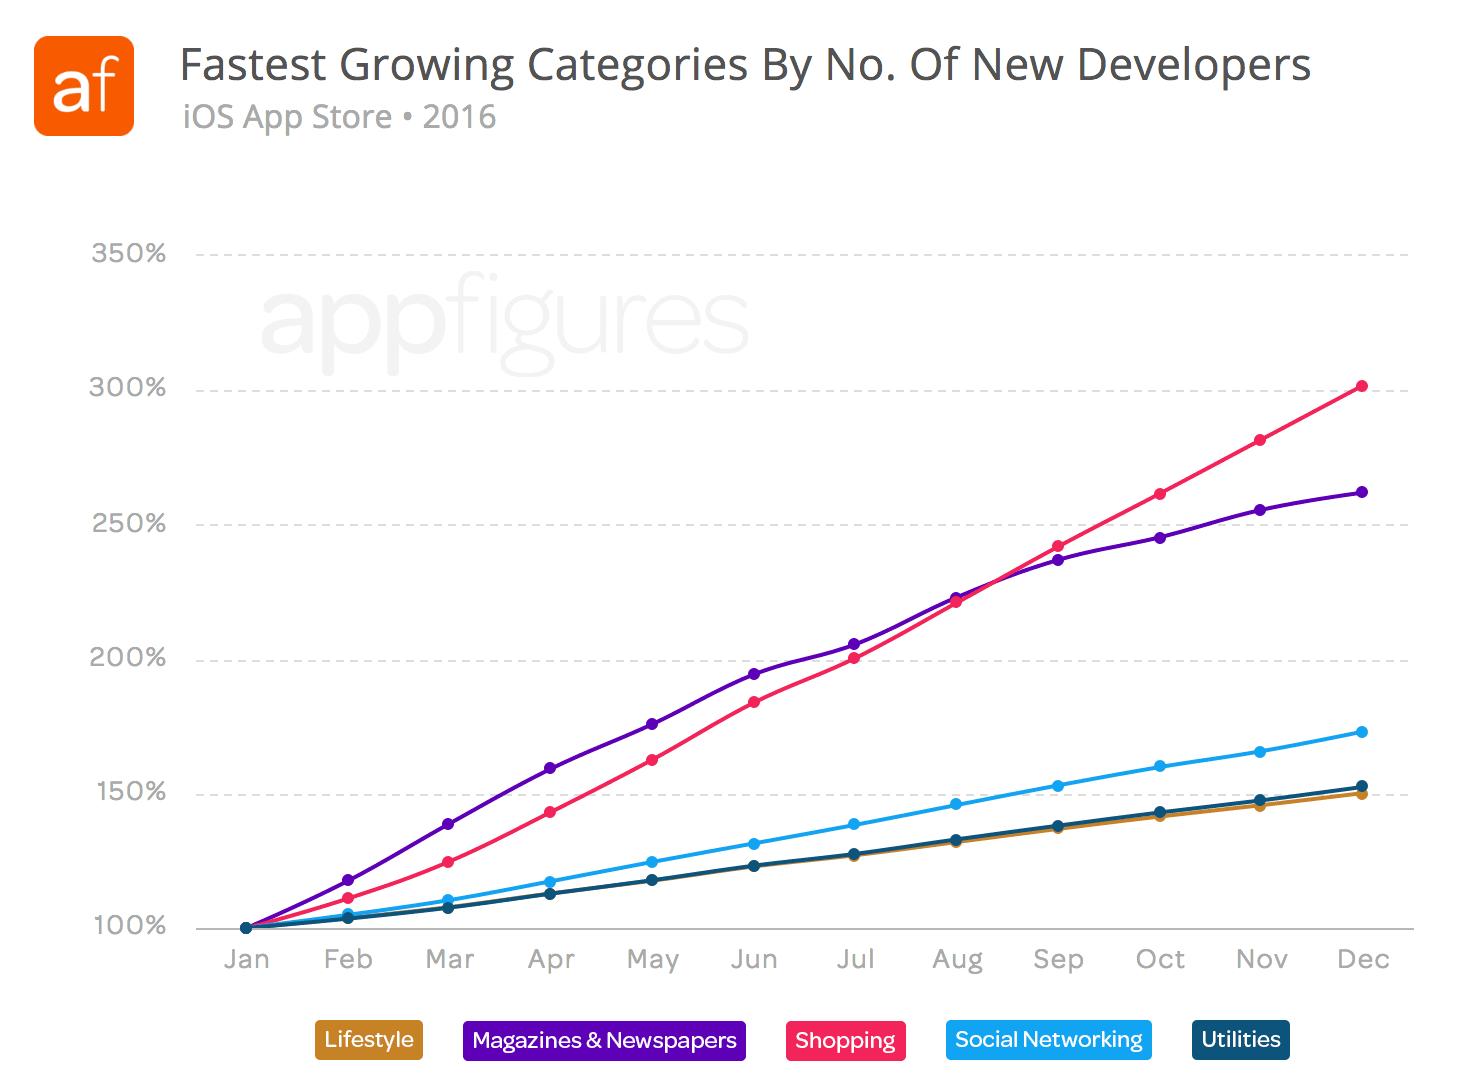 Fastest growing categories by new developers - iOS App Store